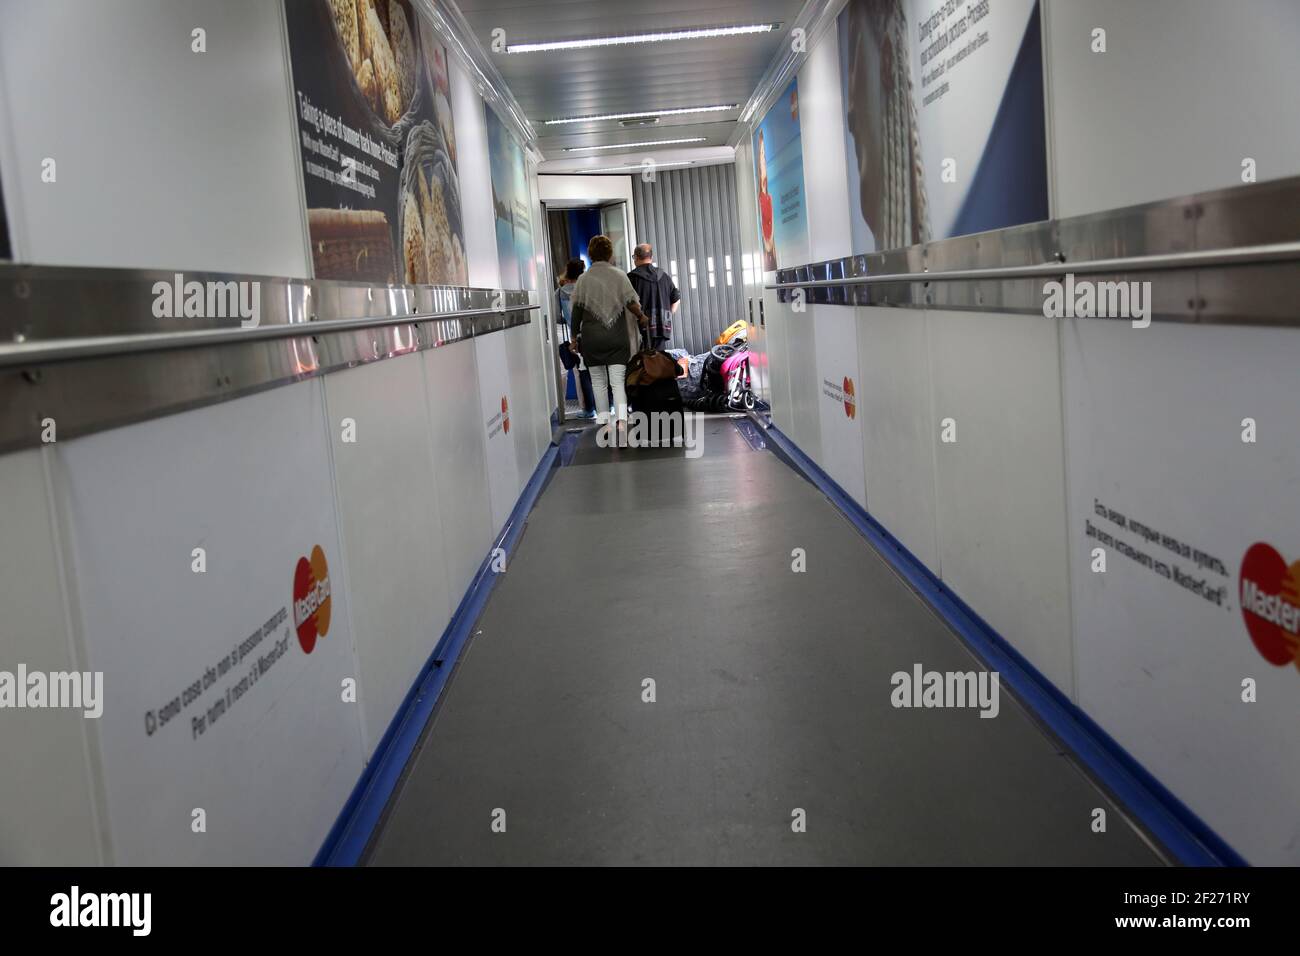 Heathrow Airport England Passengers on Jet Bridge boarding Aeroplane with Luggage to go in the hold - Luggage and Pushchair in pile on floor Stock Photo